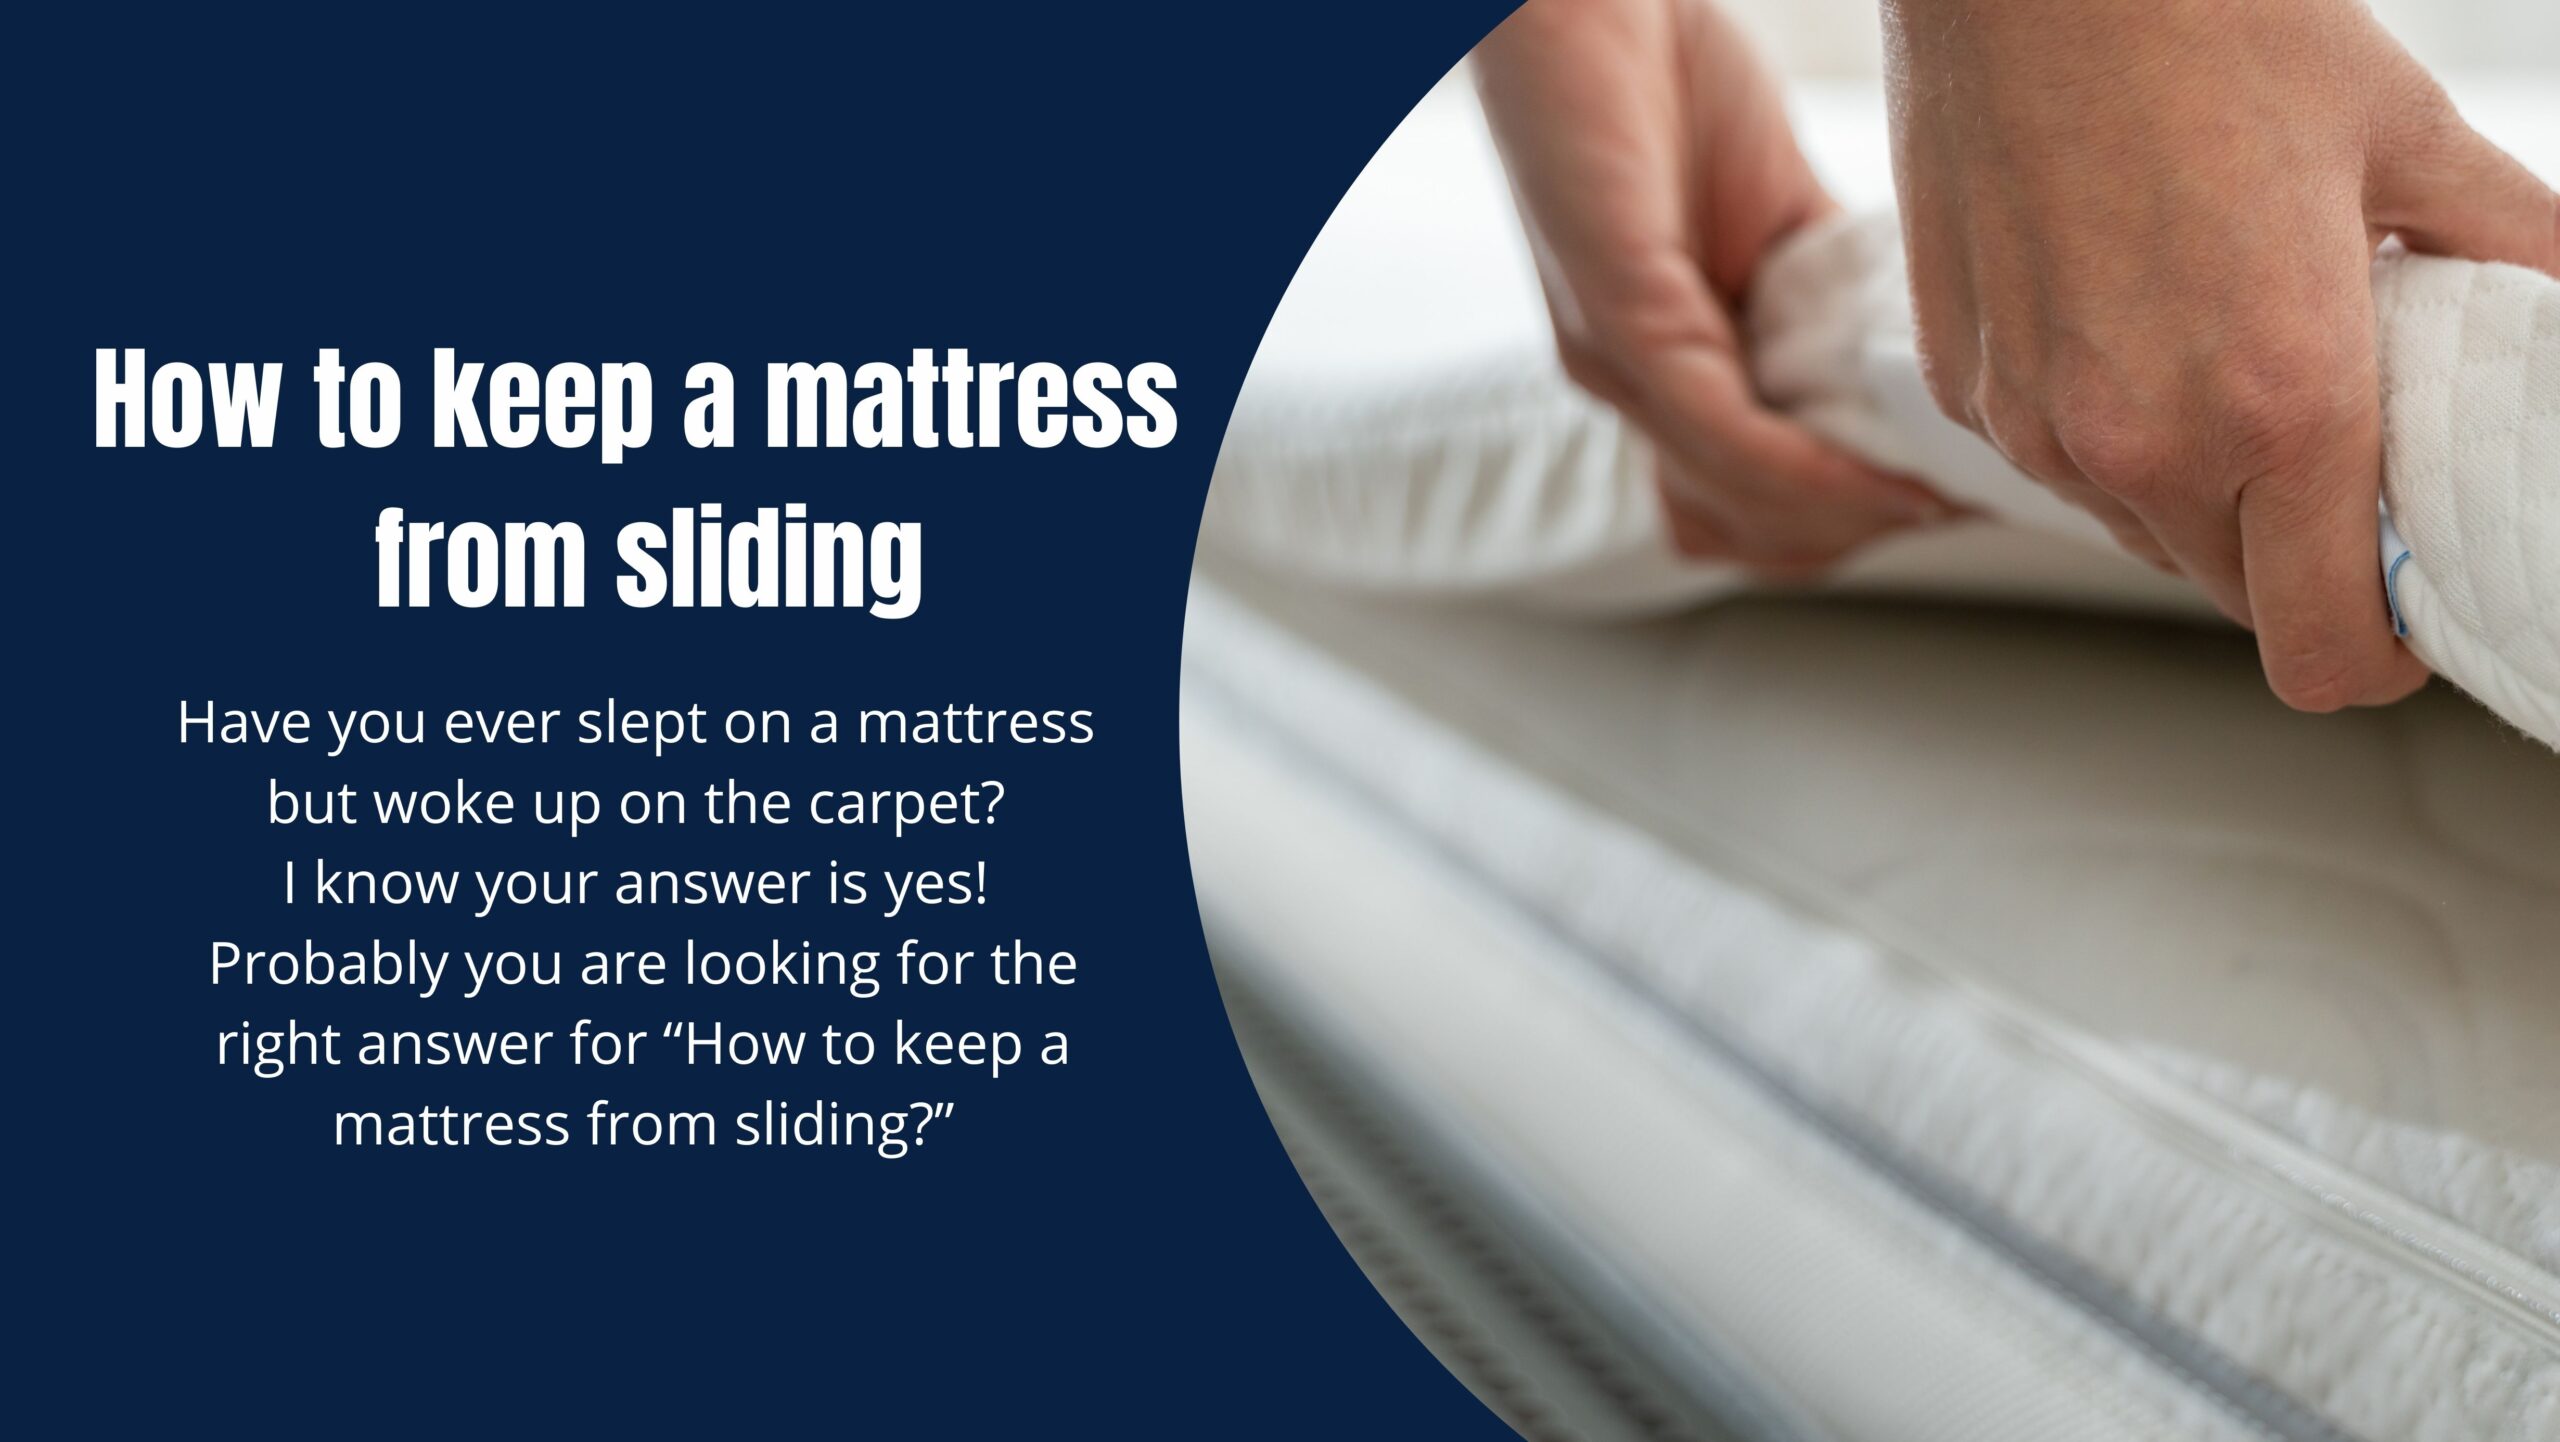 How to keep a mattress from sliding